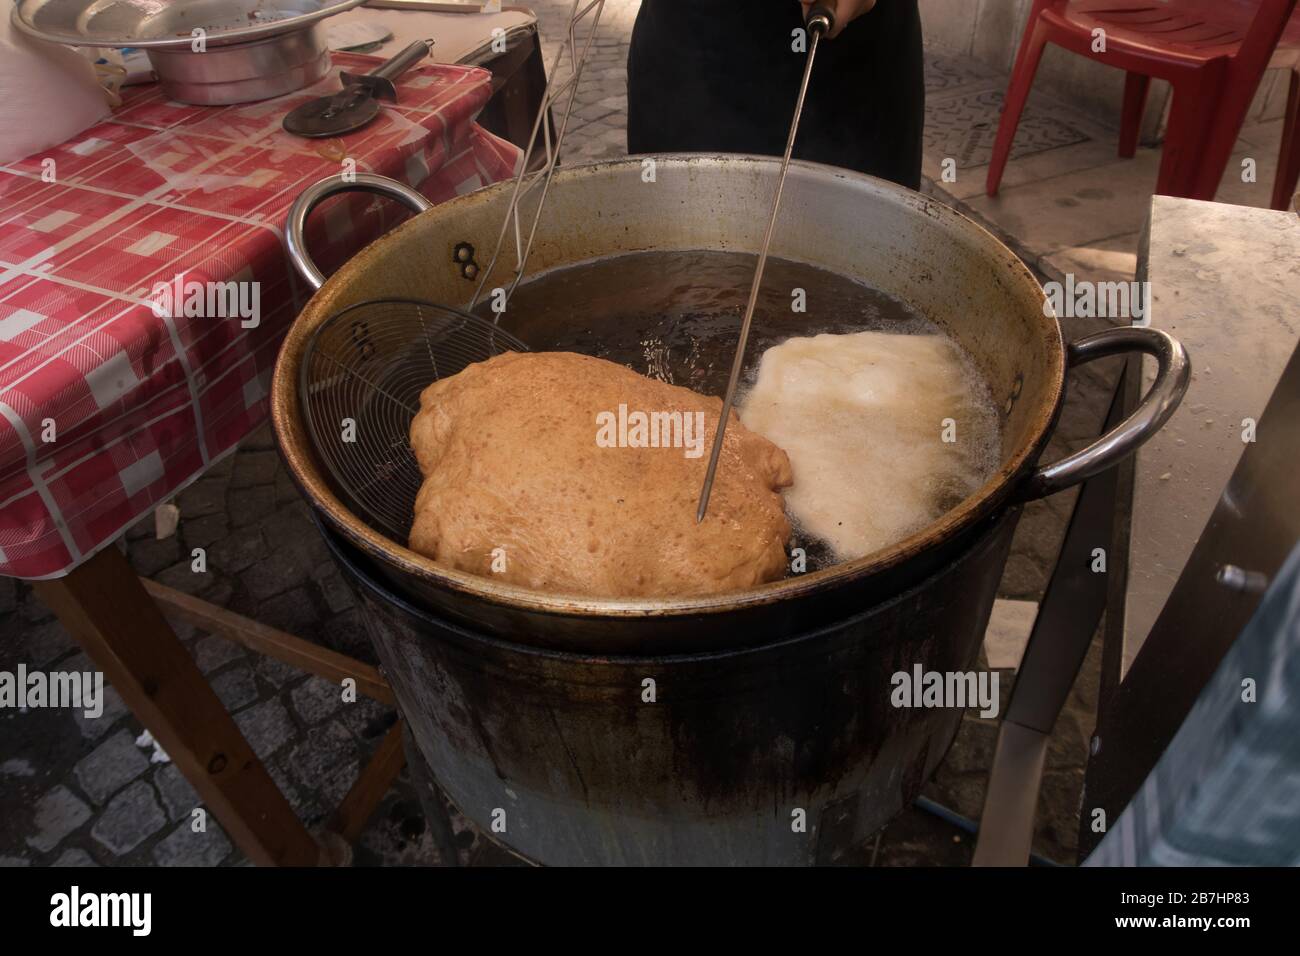 A fried pizza being prepared in boiling oil in a street of naples Stock Photo